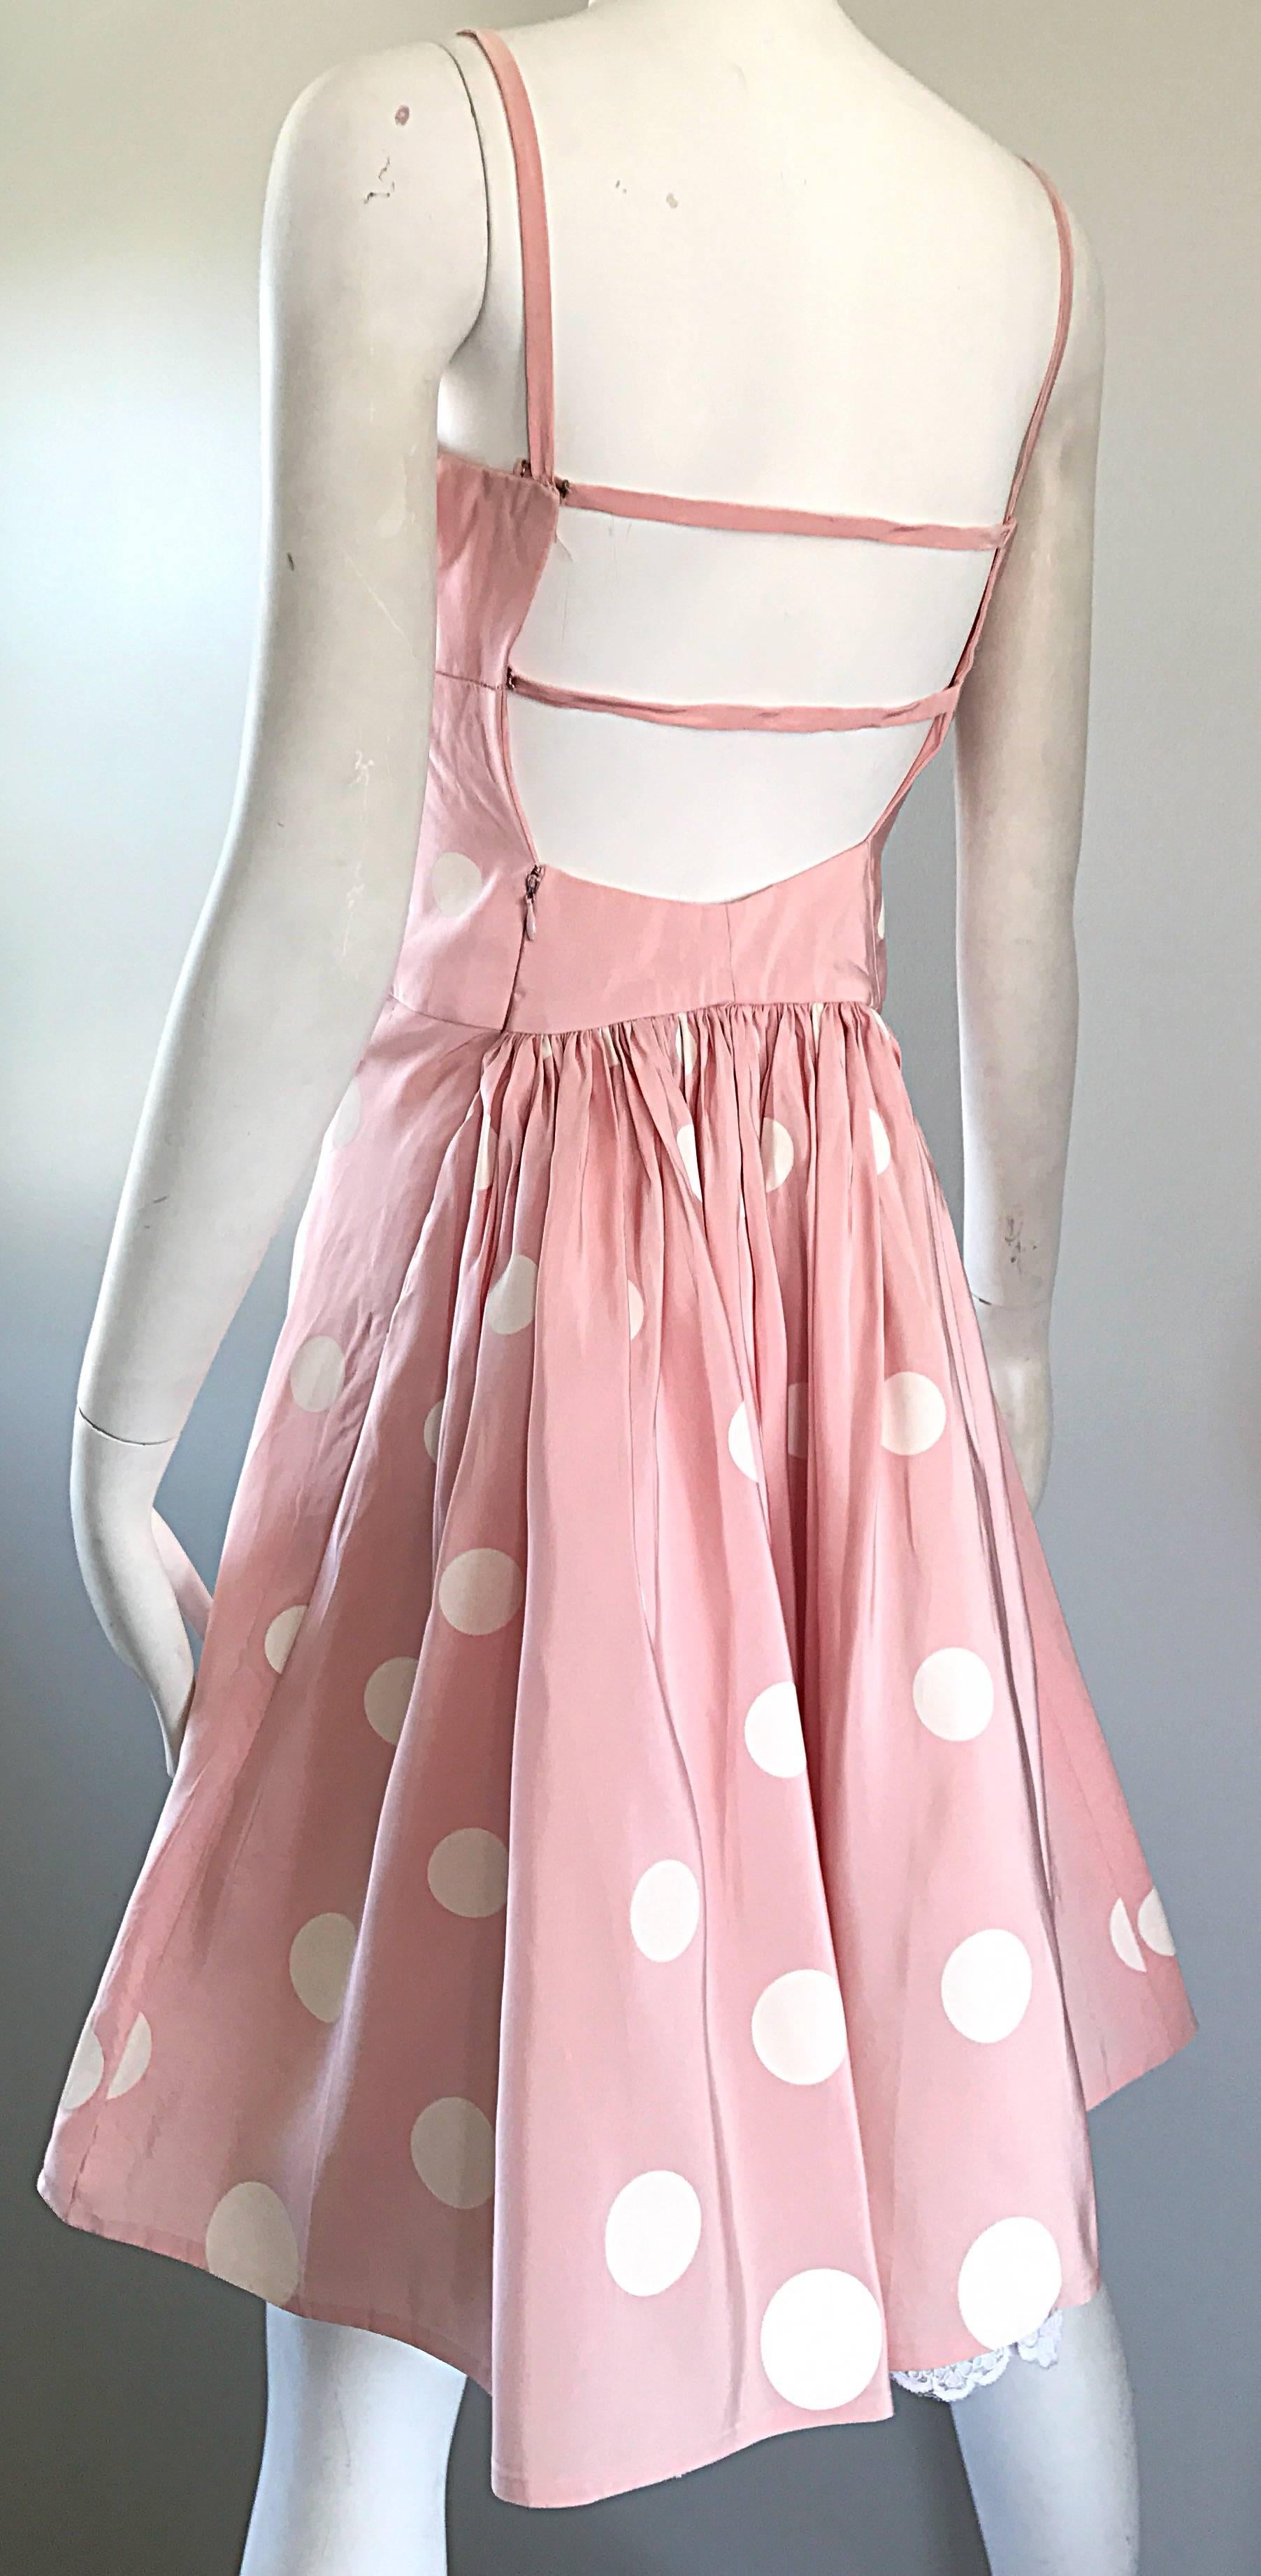 Women's Bill Blass Pink White Polka Dot Hand Painted Fit and Flare Vintage Dress, 1990 For Sale